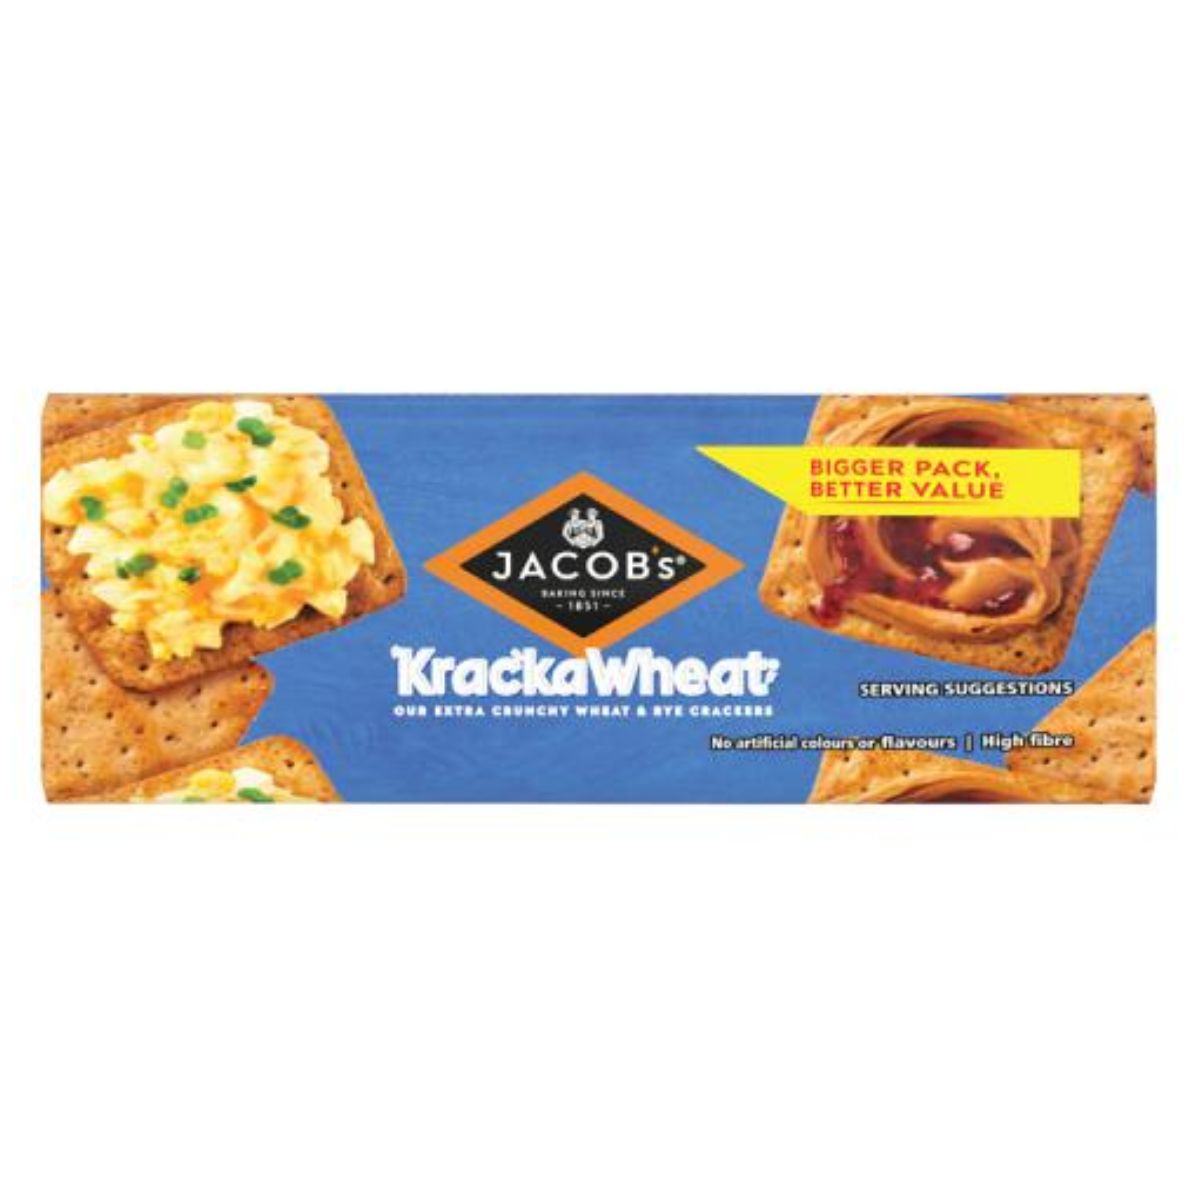 A pack of Jacobs - Krackawheat - 230g crackers displaying images of the crackers topped with egg salad and melted cheese.